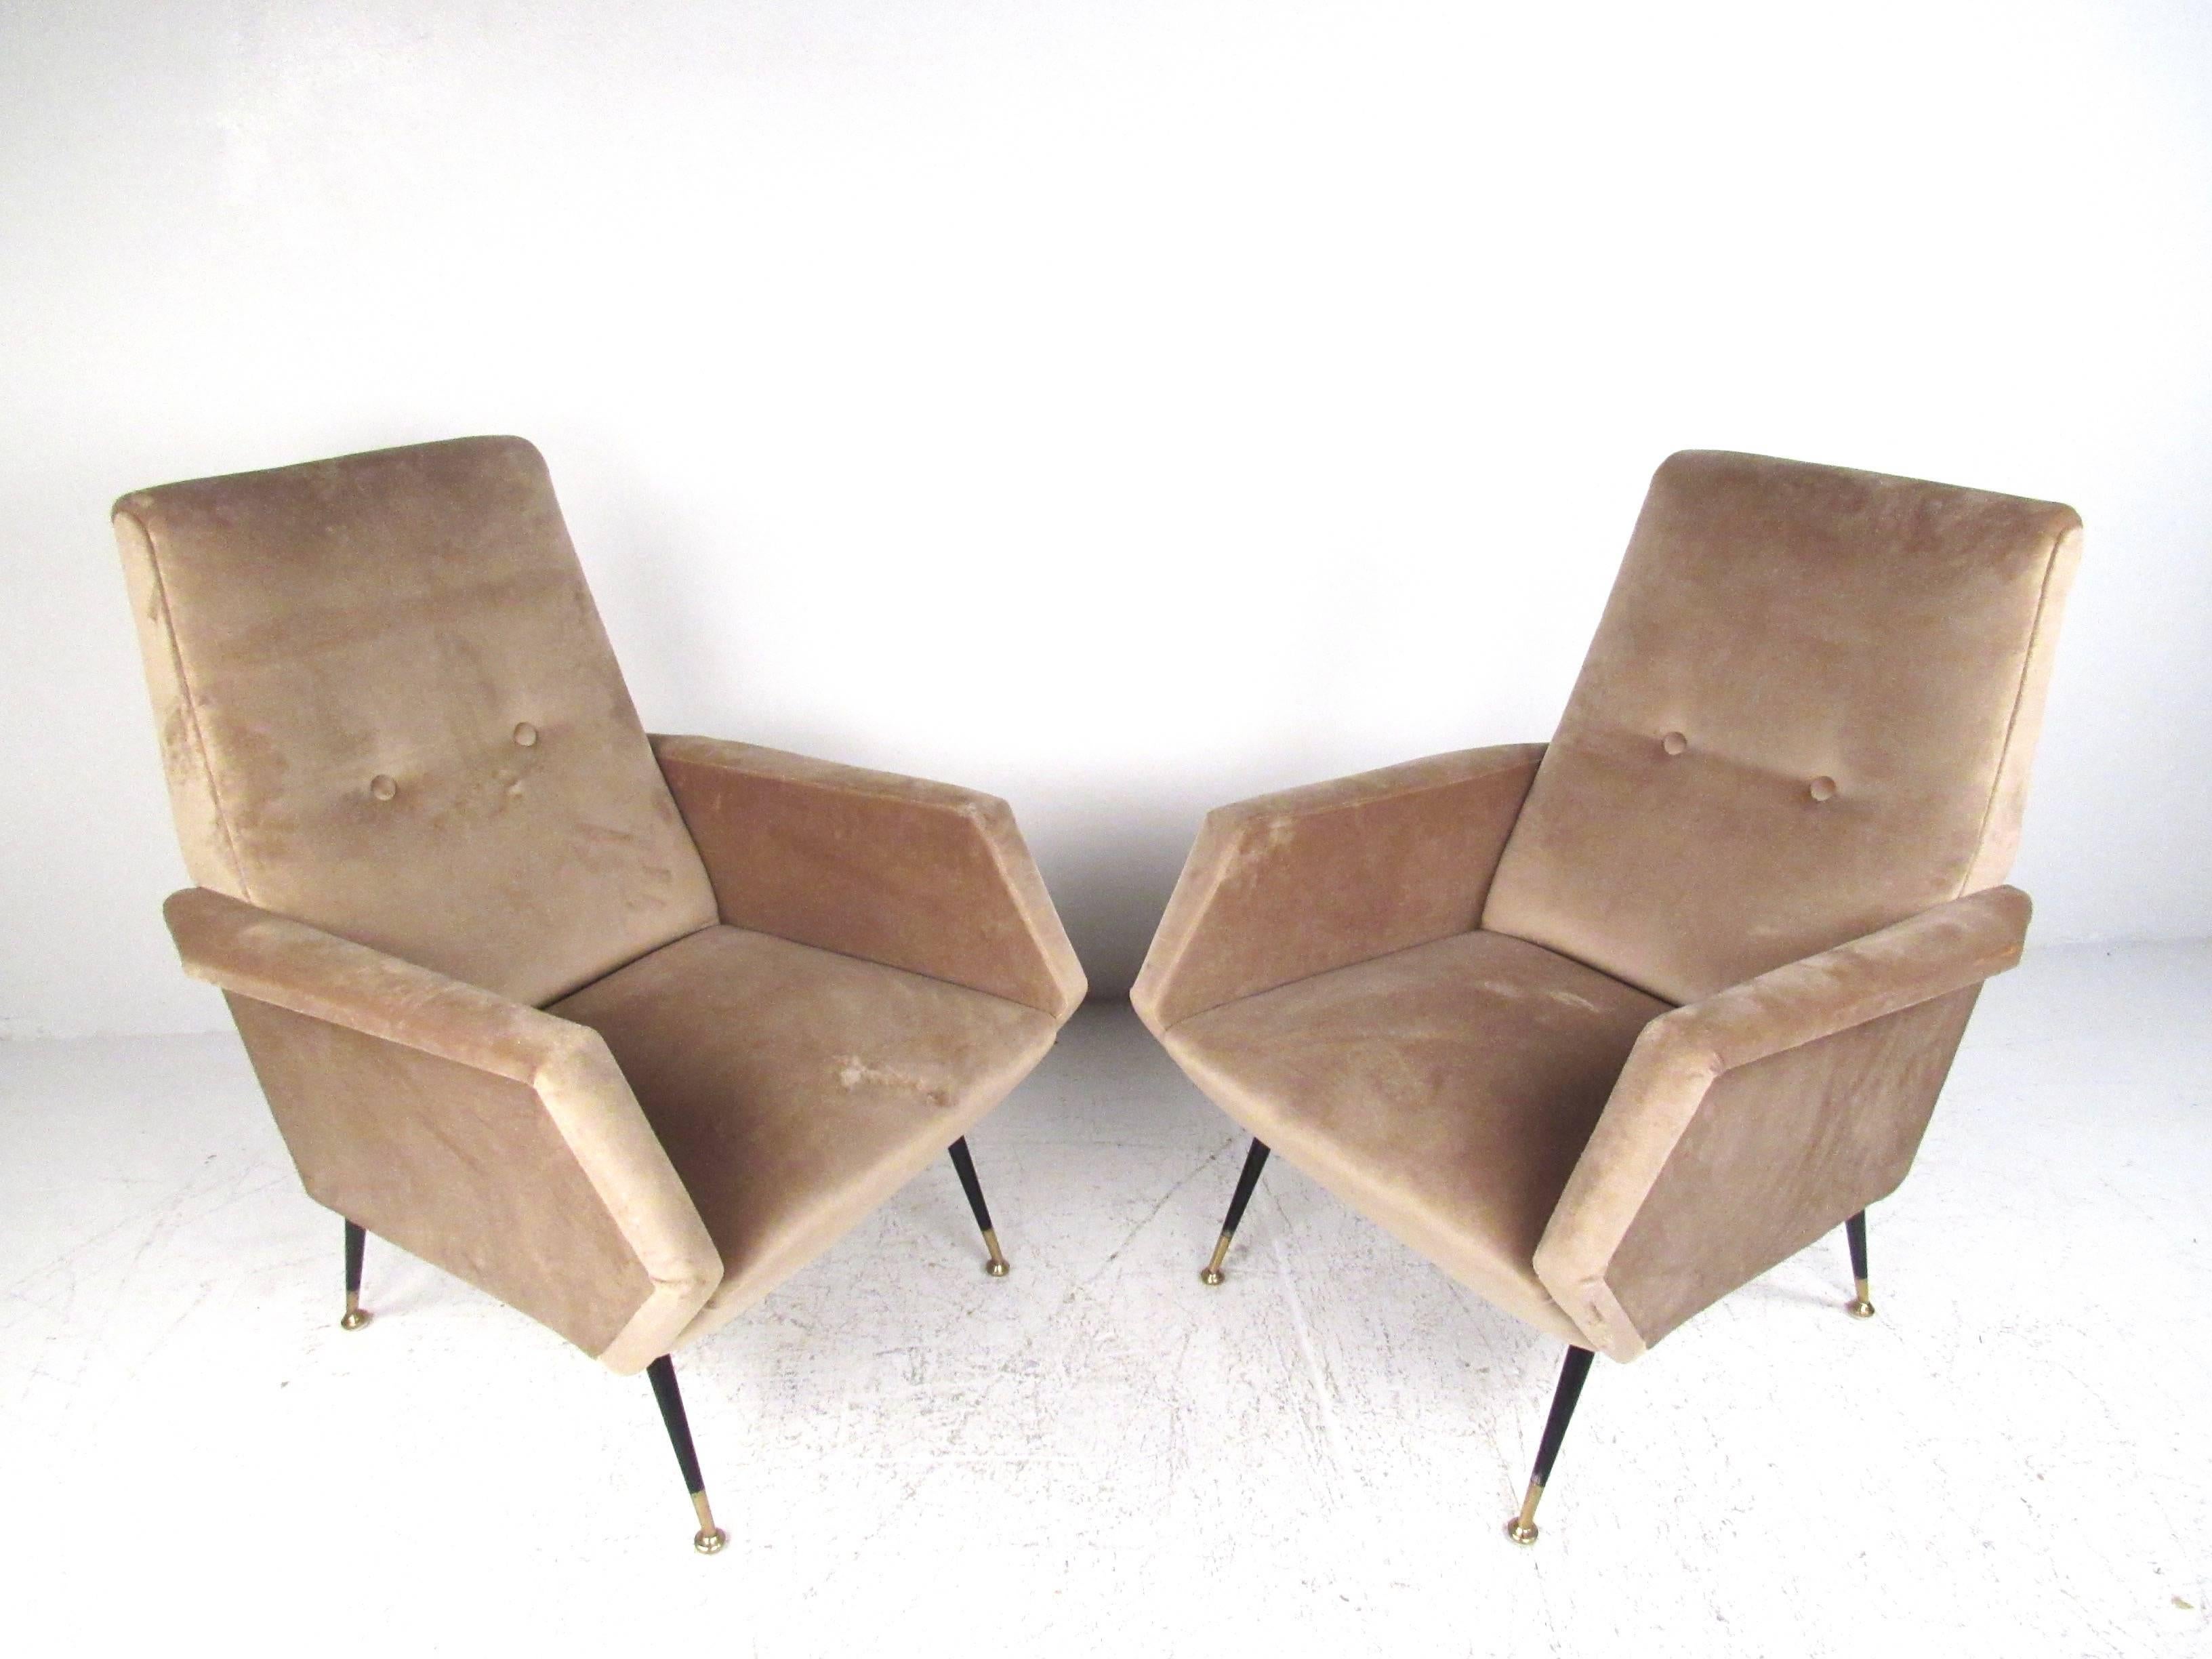 This beautiful pair of upholstered lounge chairs features plush upholstered fabric with tufted details, tapered brass tipped metal legs, and comfortable seating proportions. This matching Mid-Century pair looks great from any angle, with sculpted